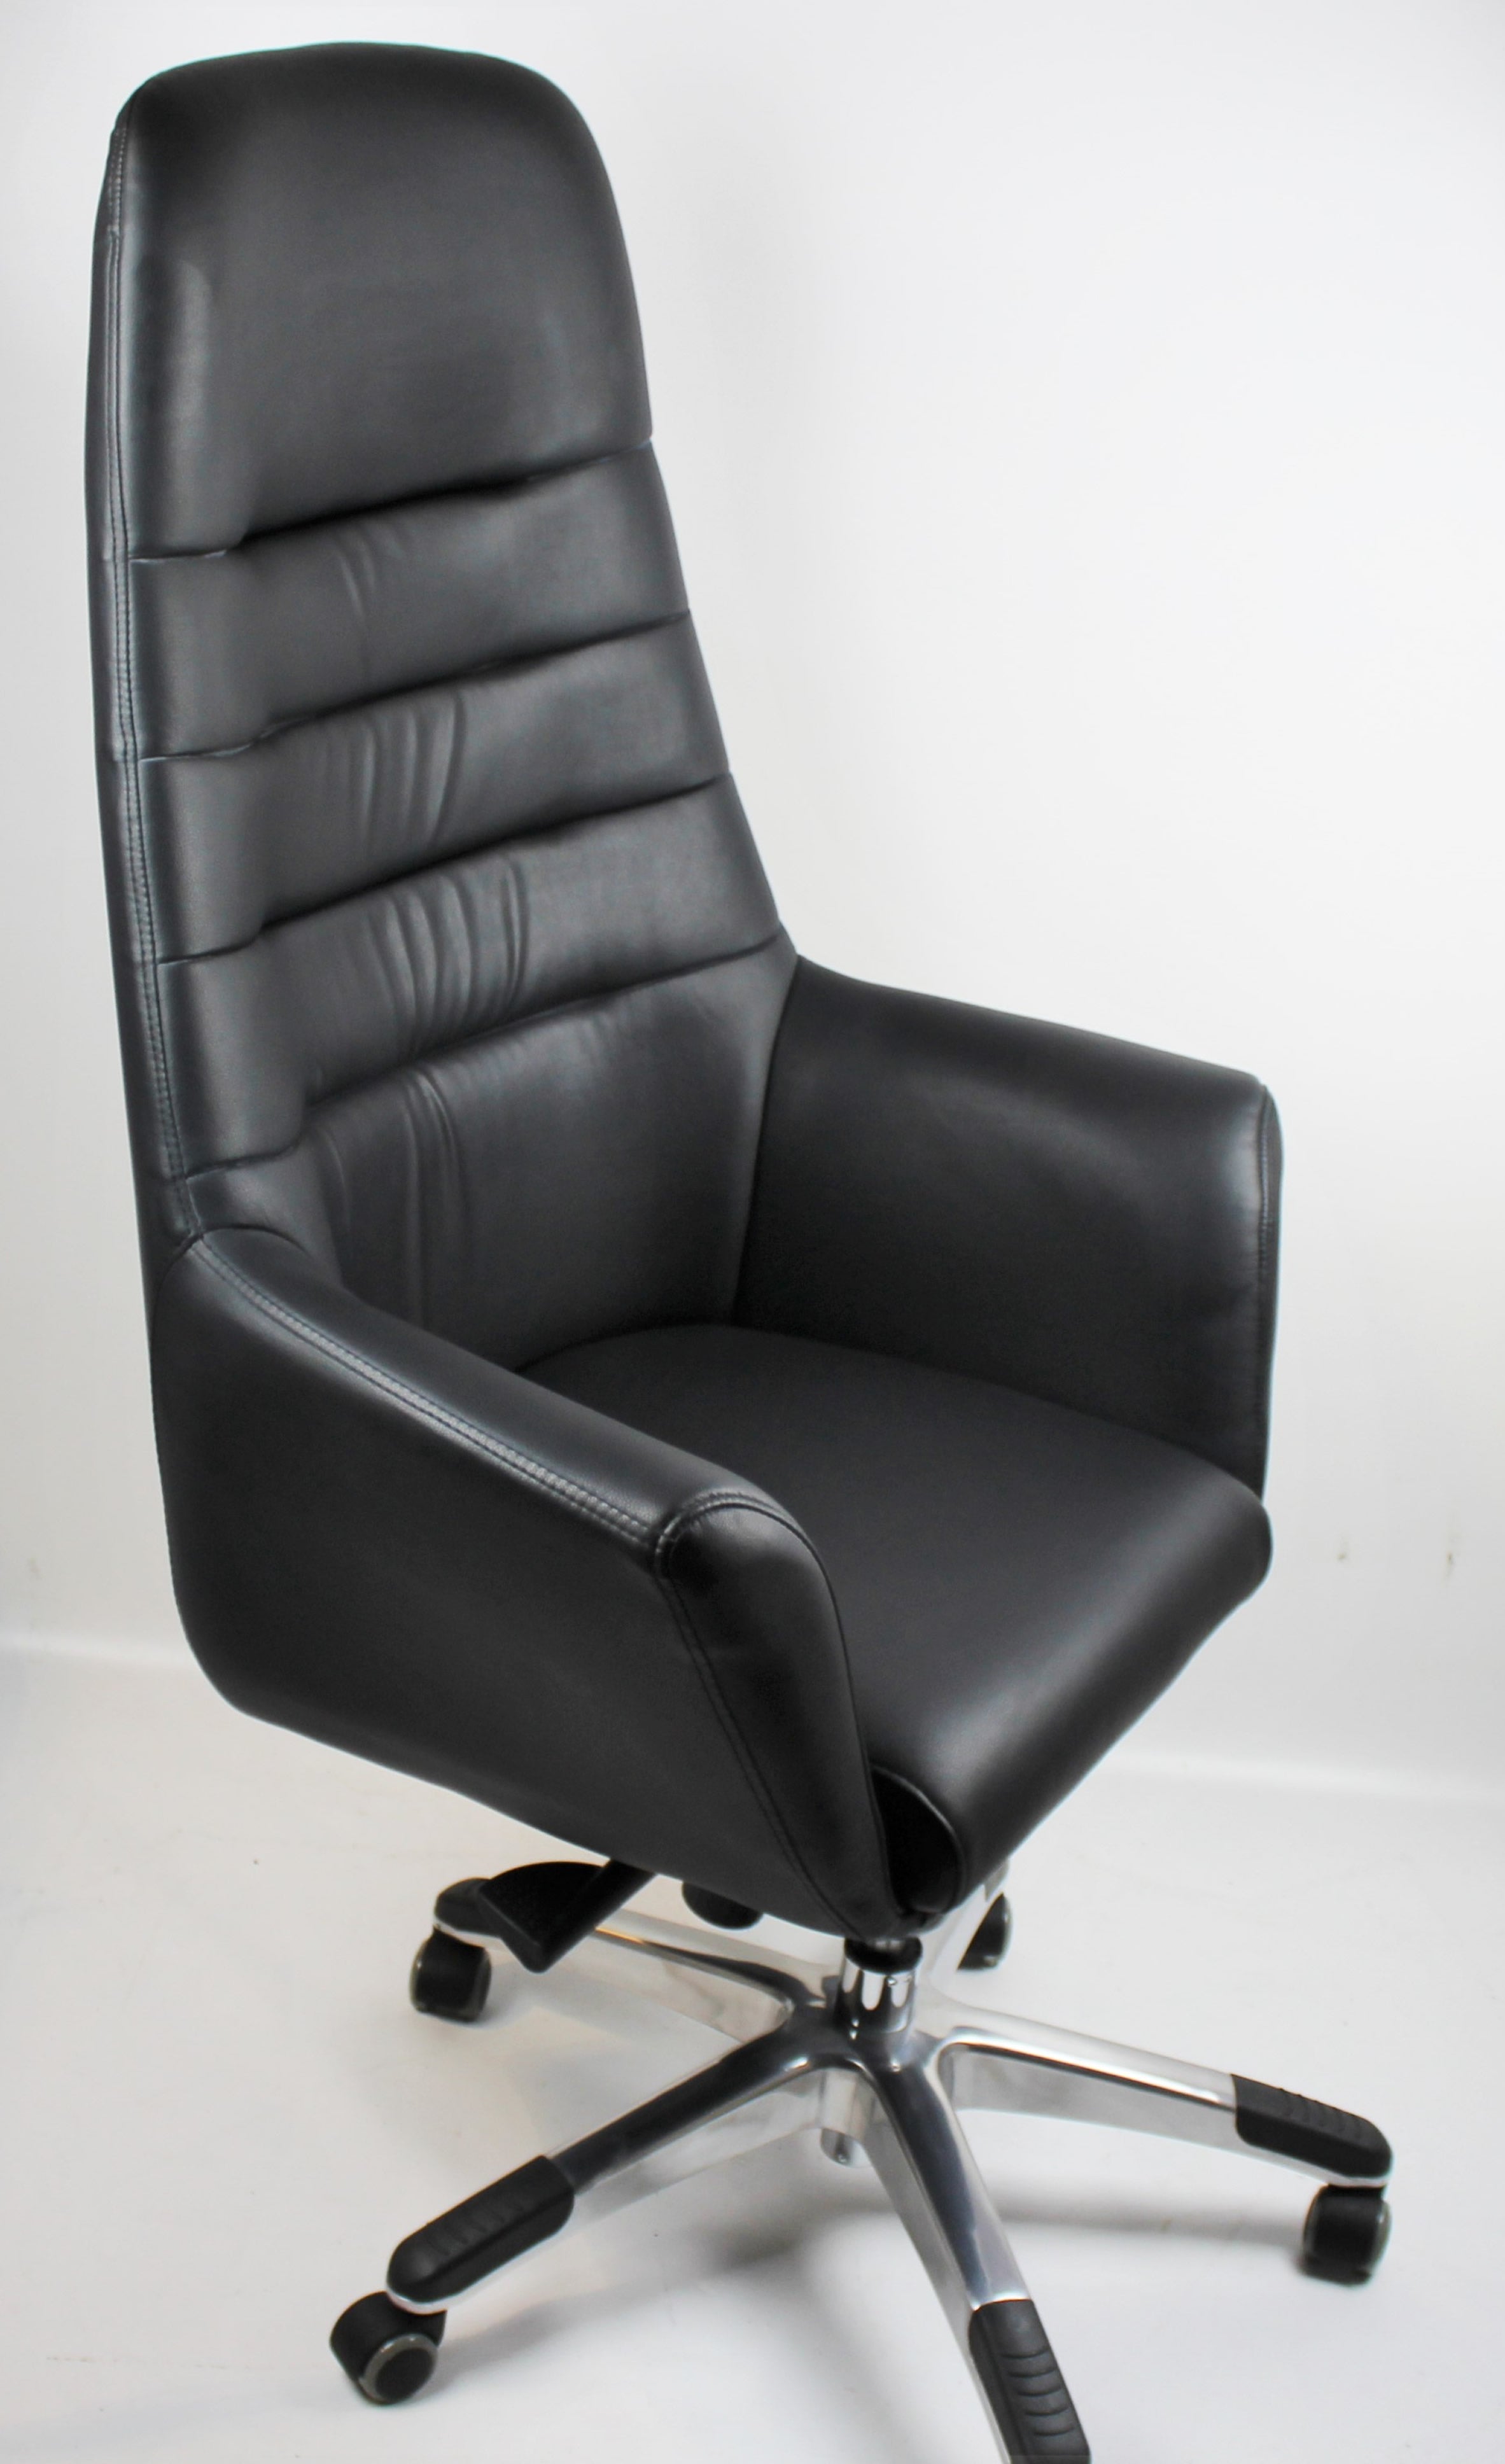 Office Chair In Black With Swivel GRA-CHA-506A-BLK Huddersfield